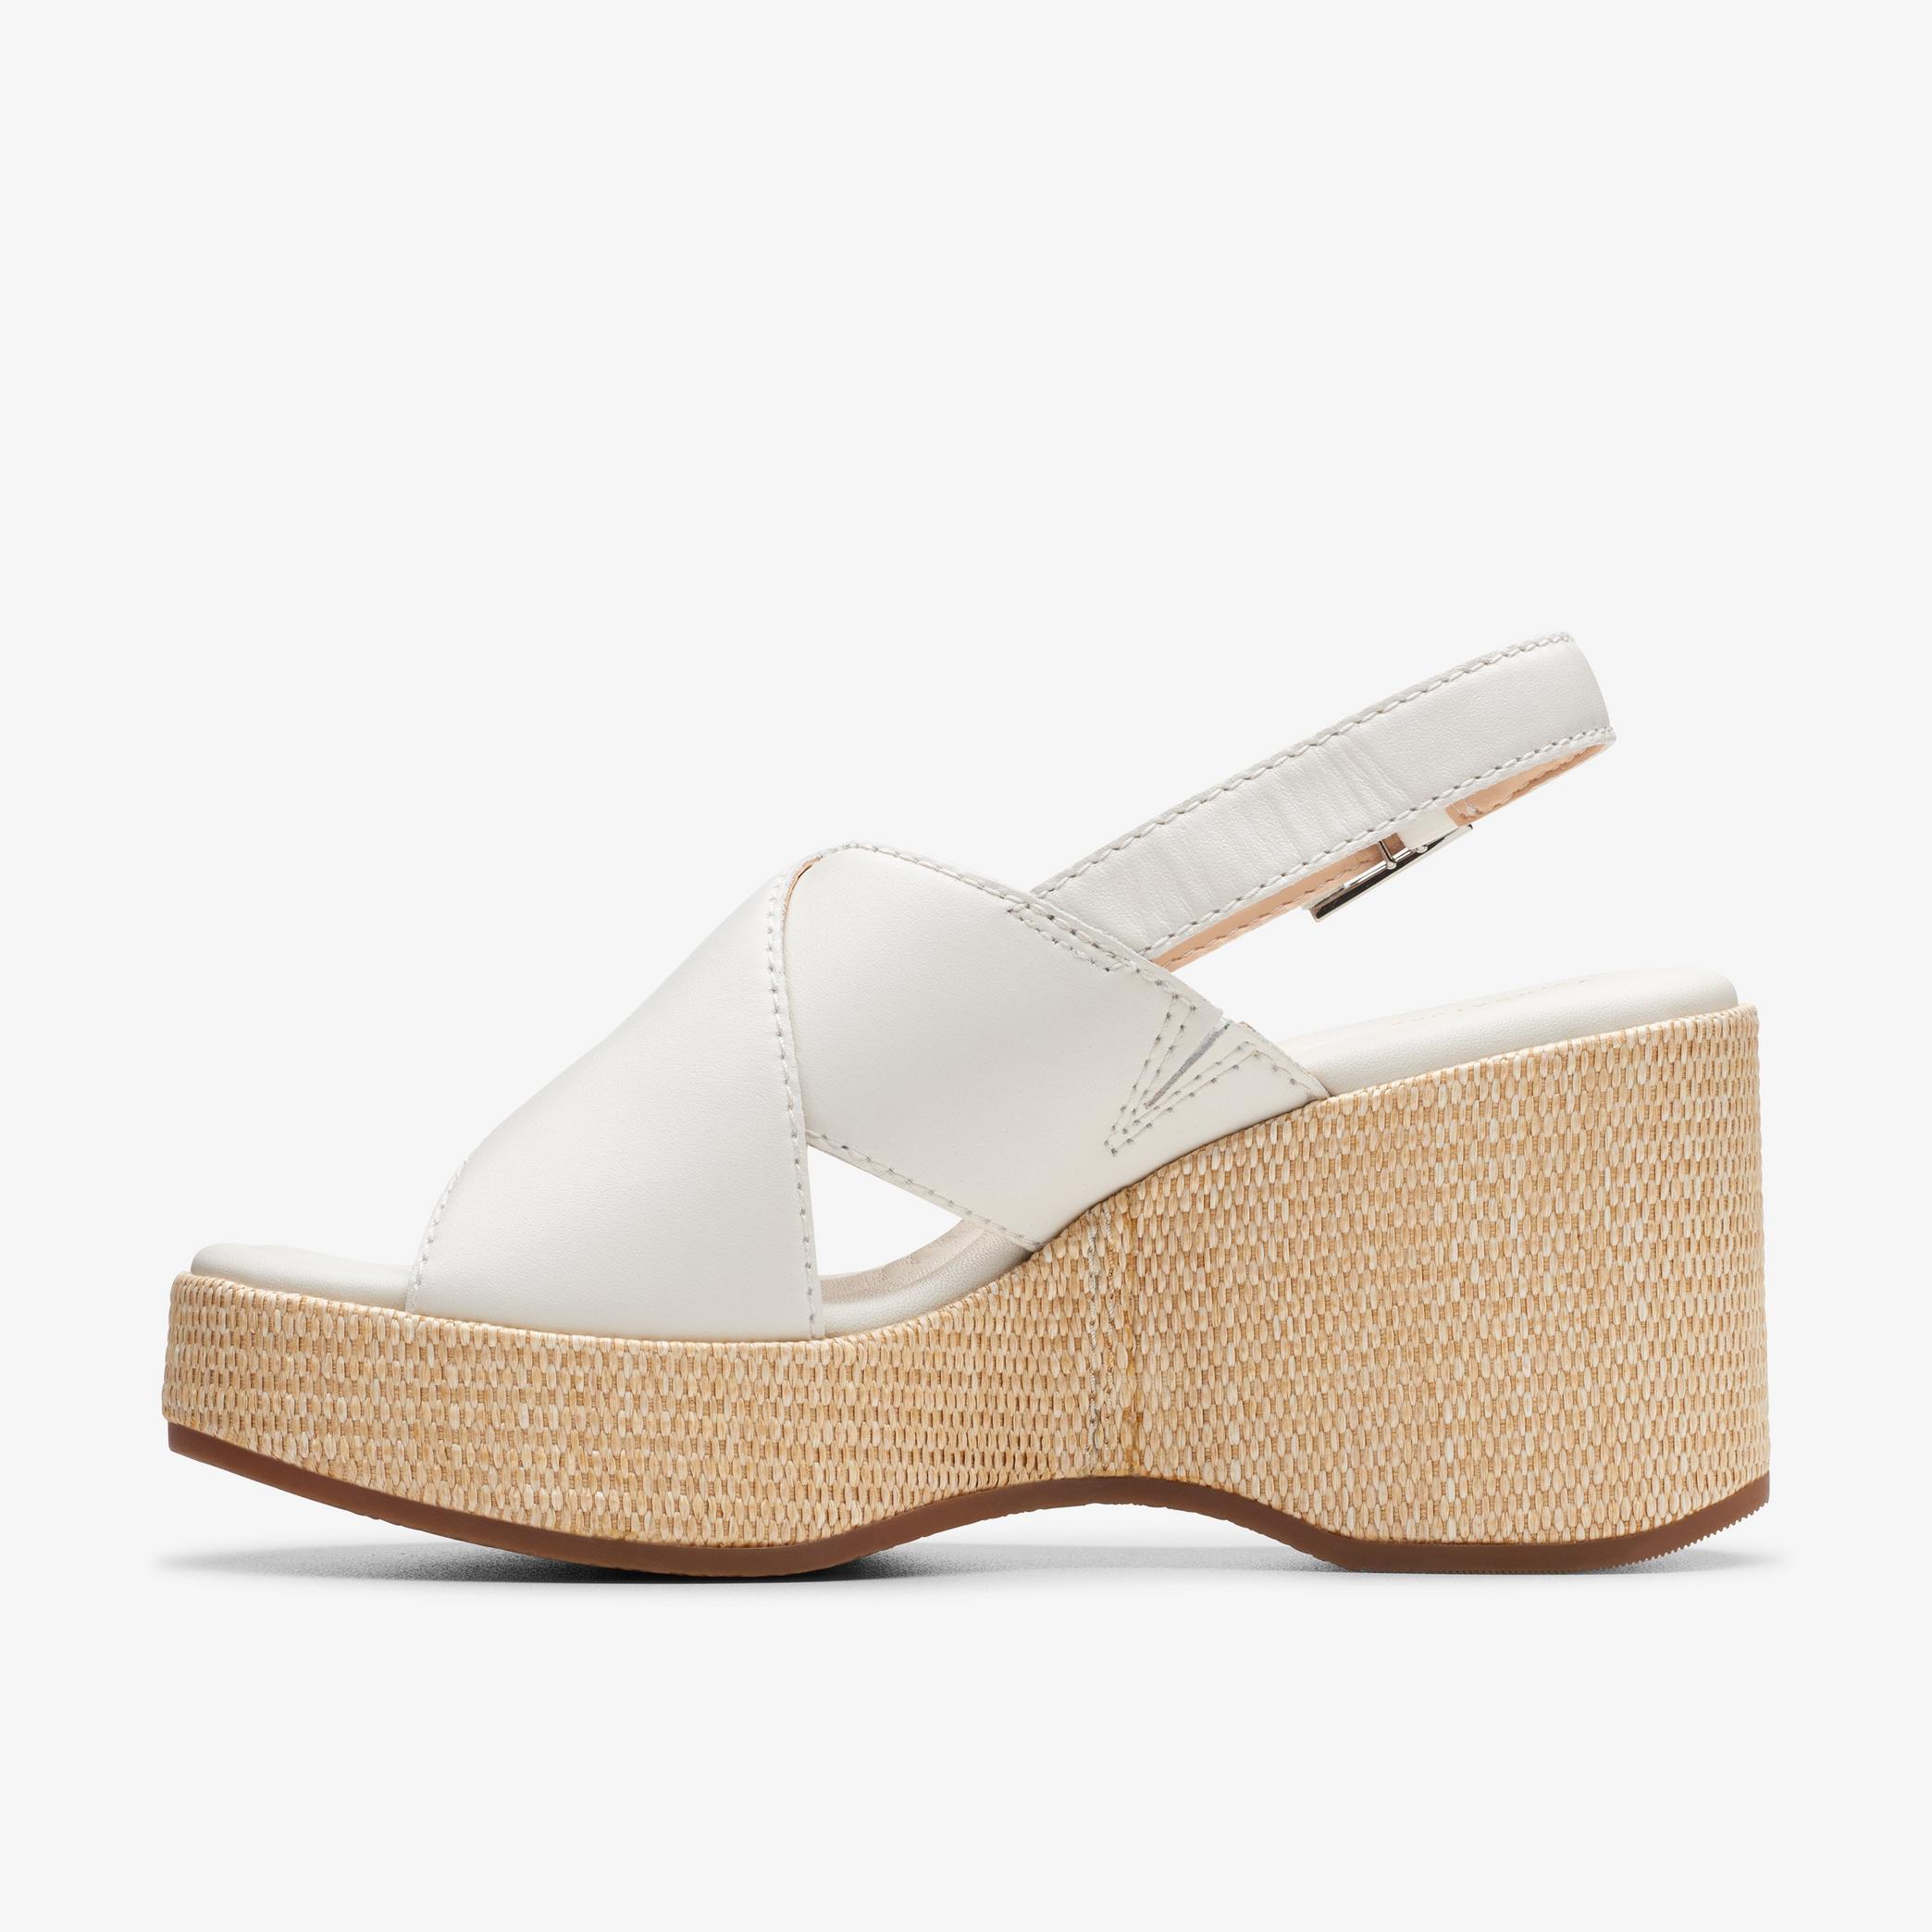 Manon Wish Off White Leather Heeled Sandals, view 2 of 6